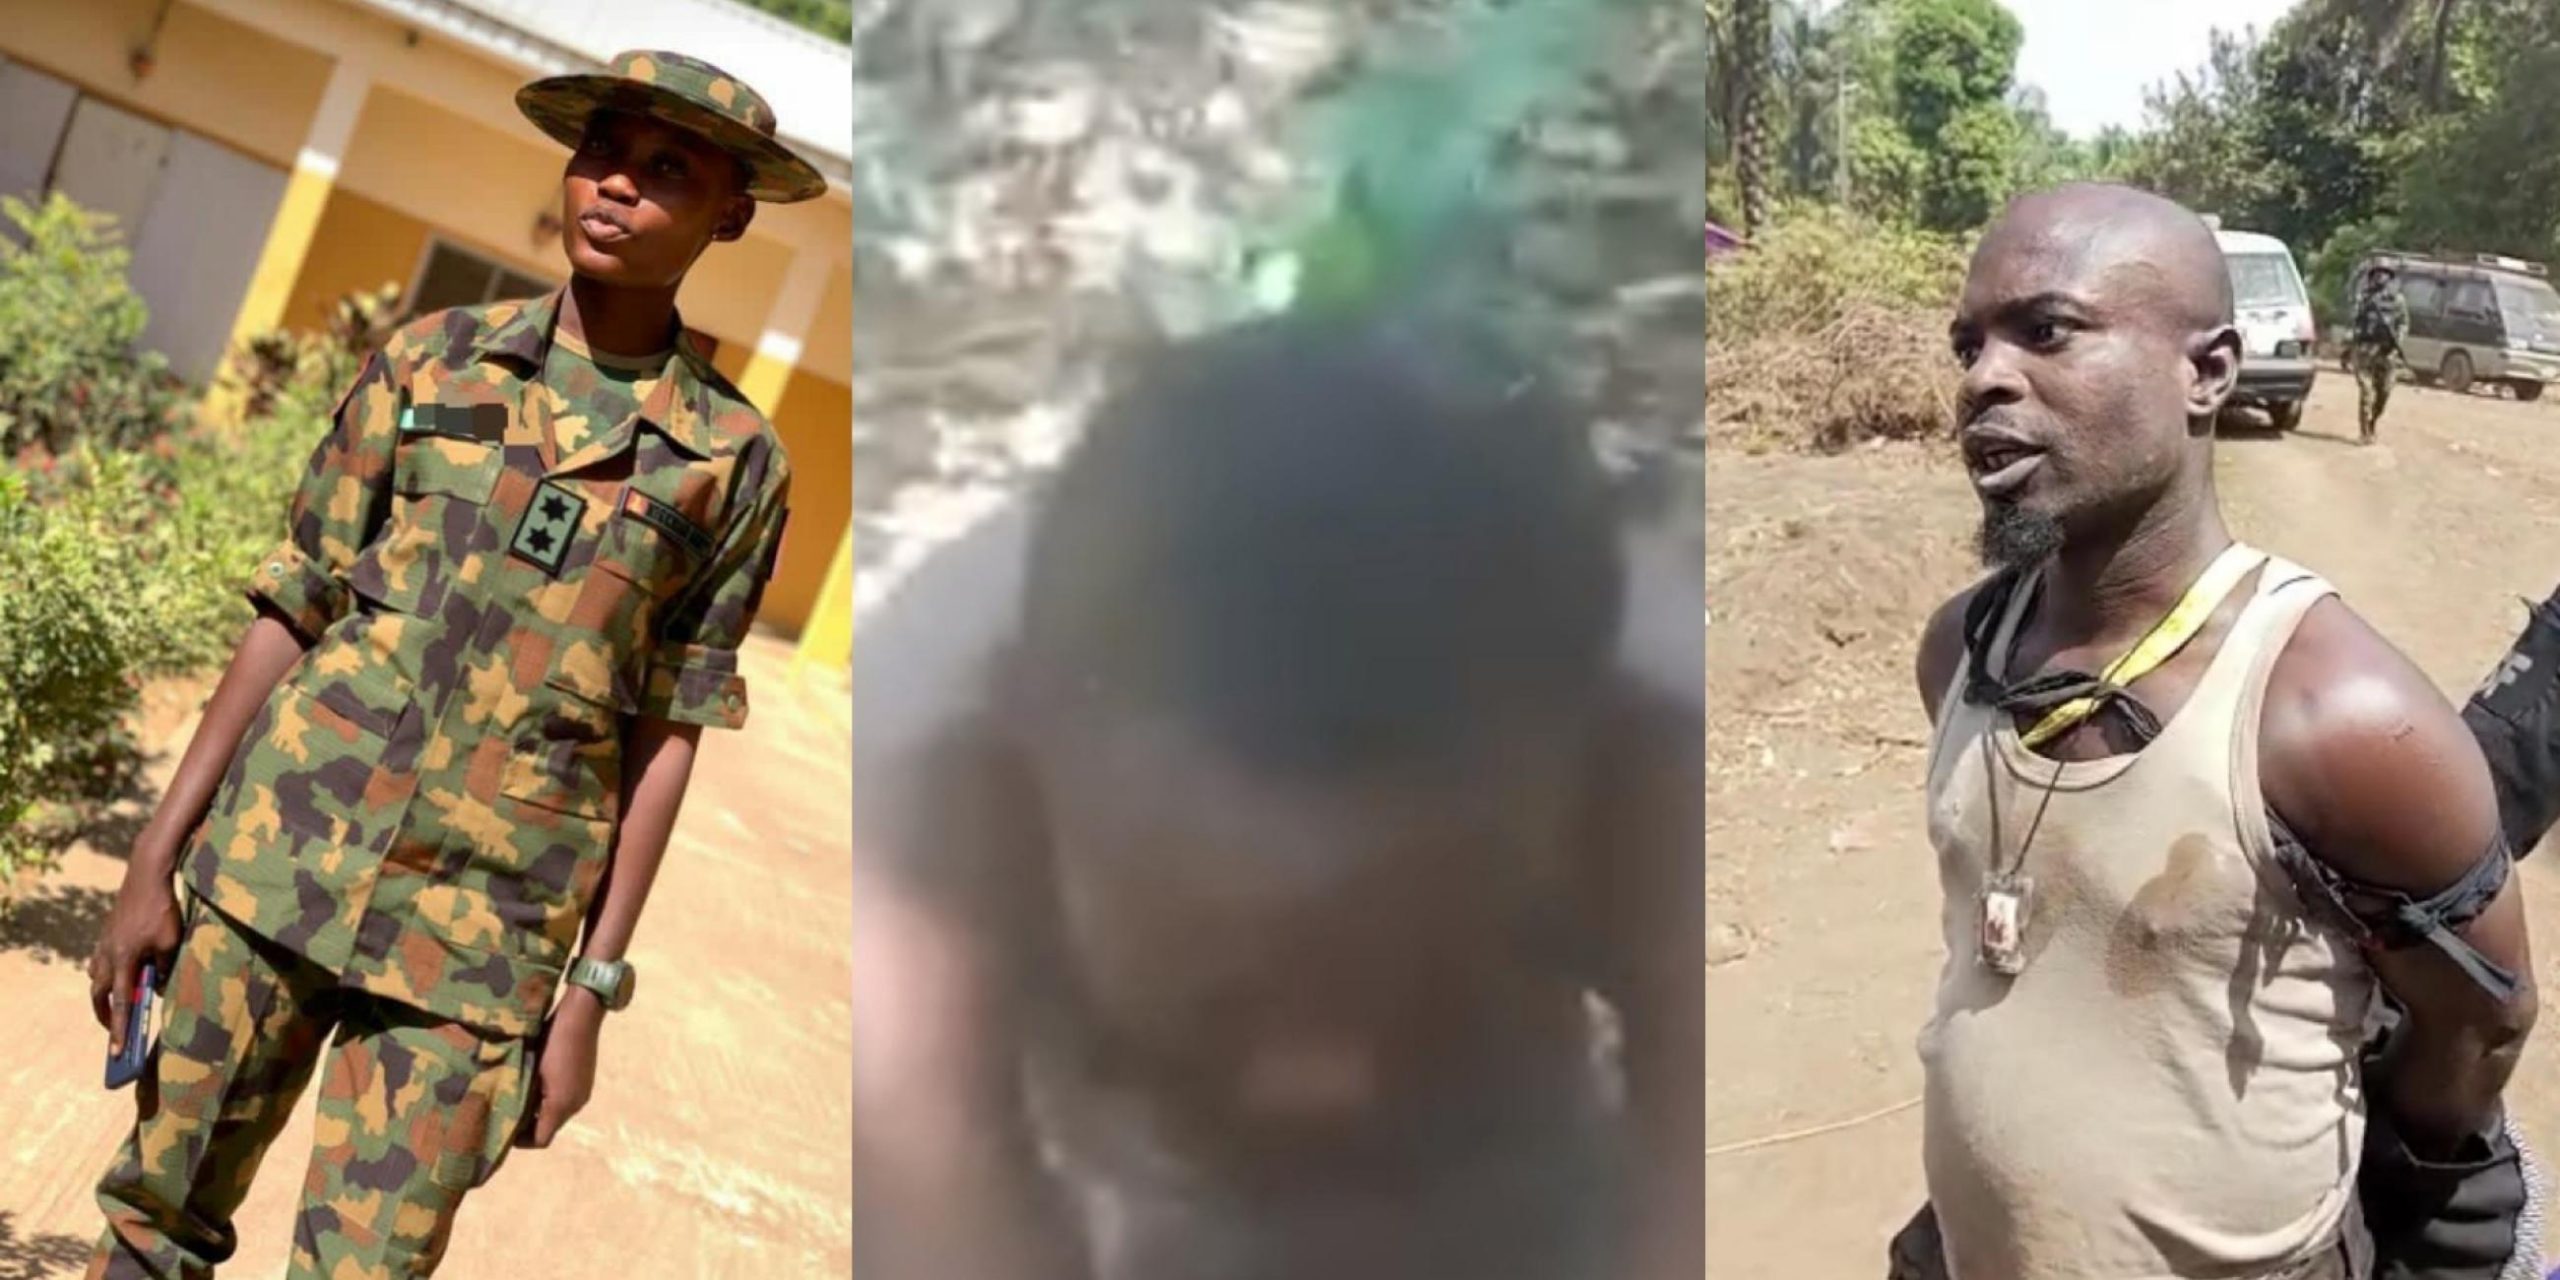 Army rescues Female Soldier captured, stripped naked by ‘Unknown Gunmen’ [PICS]